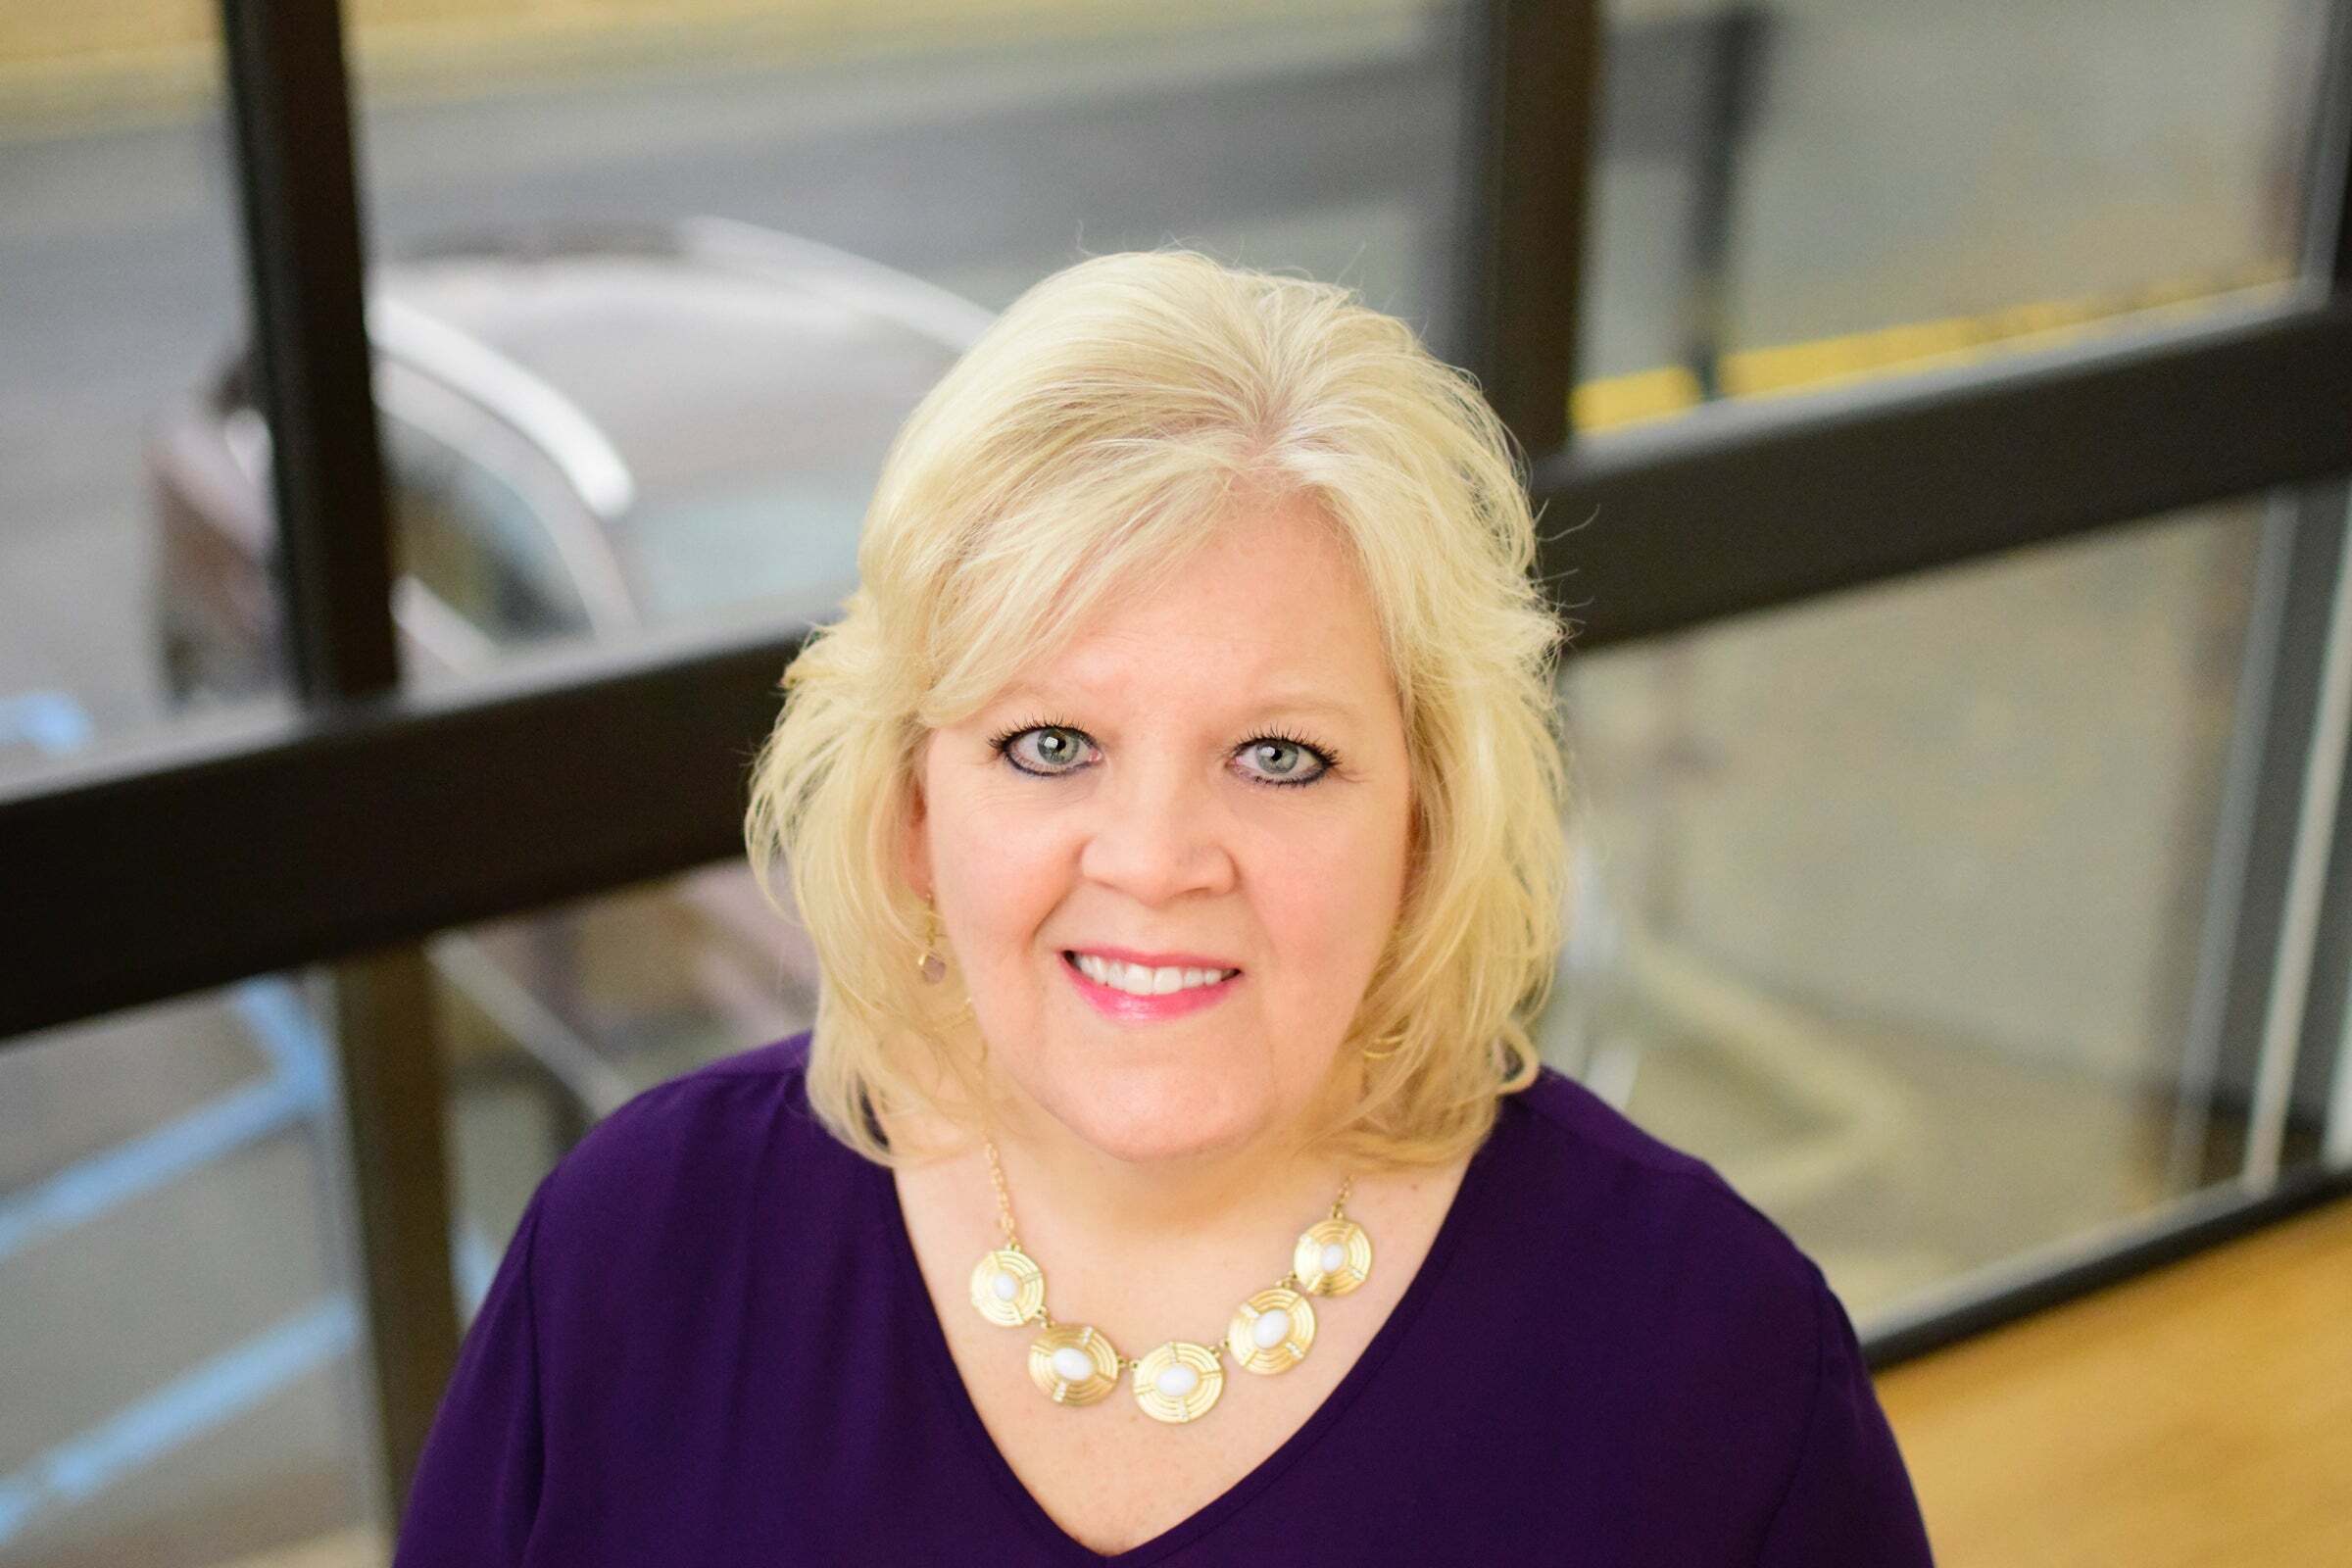 Cindy Meacham, Real Estate Salesperson in Moody, ERA King Real Estate Company, Inc.